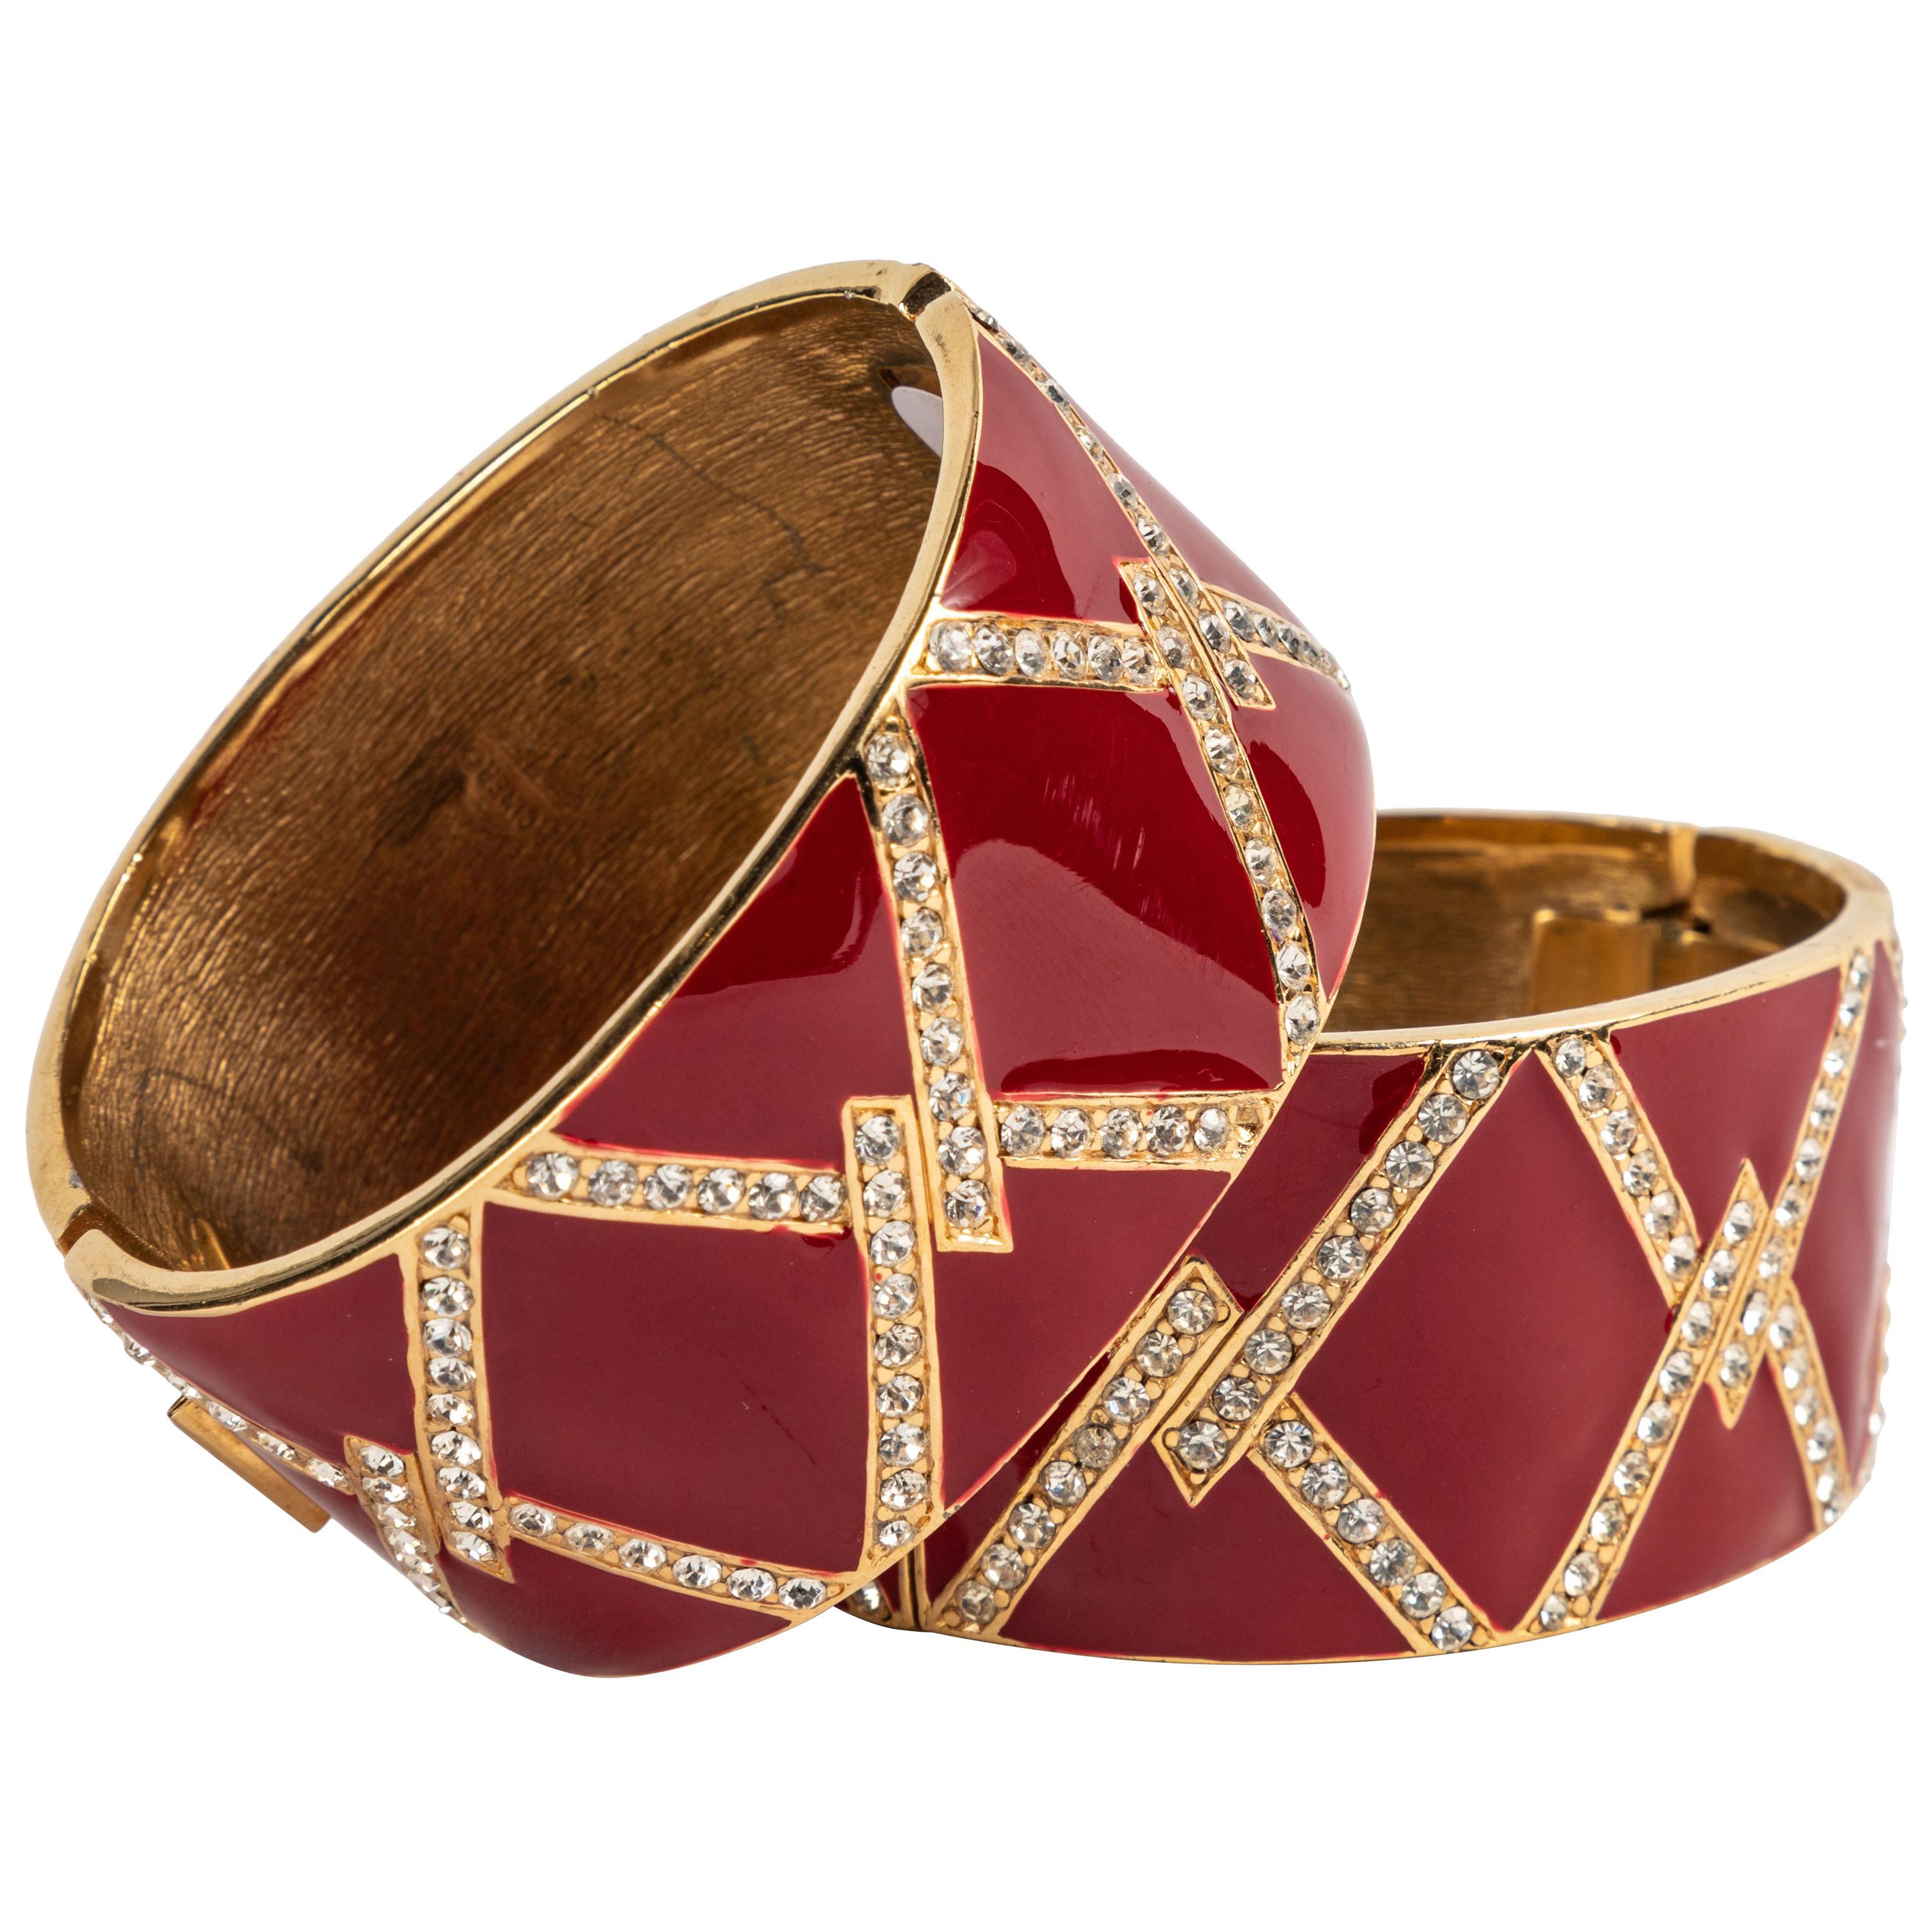 A Pair of Red Enamel and Rhinestone Cuffs by Ciner